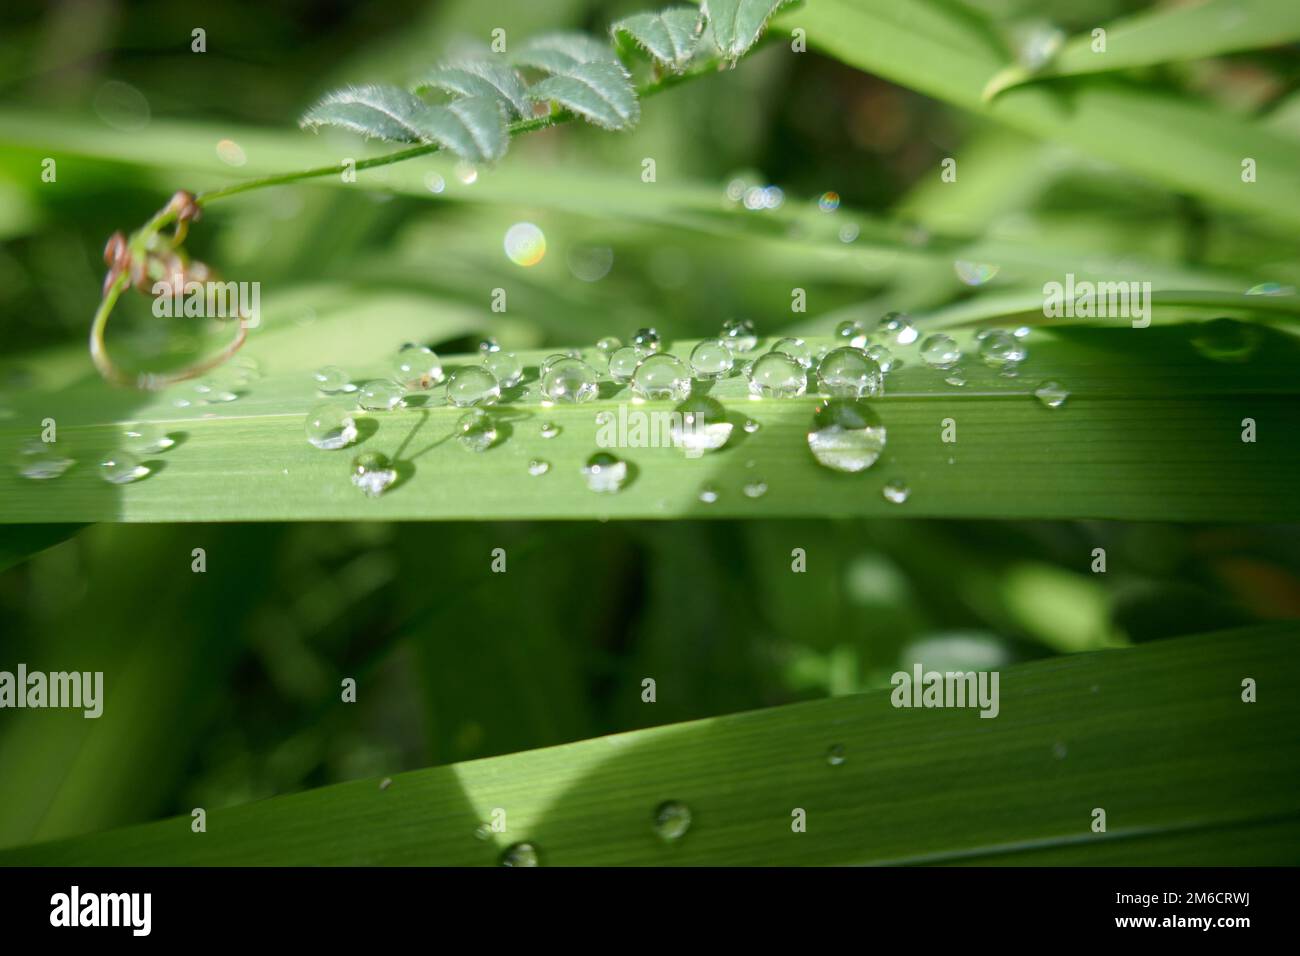 Lush green plant leaves with water droplets Stock Photo